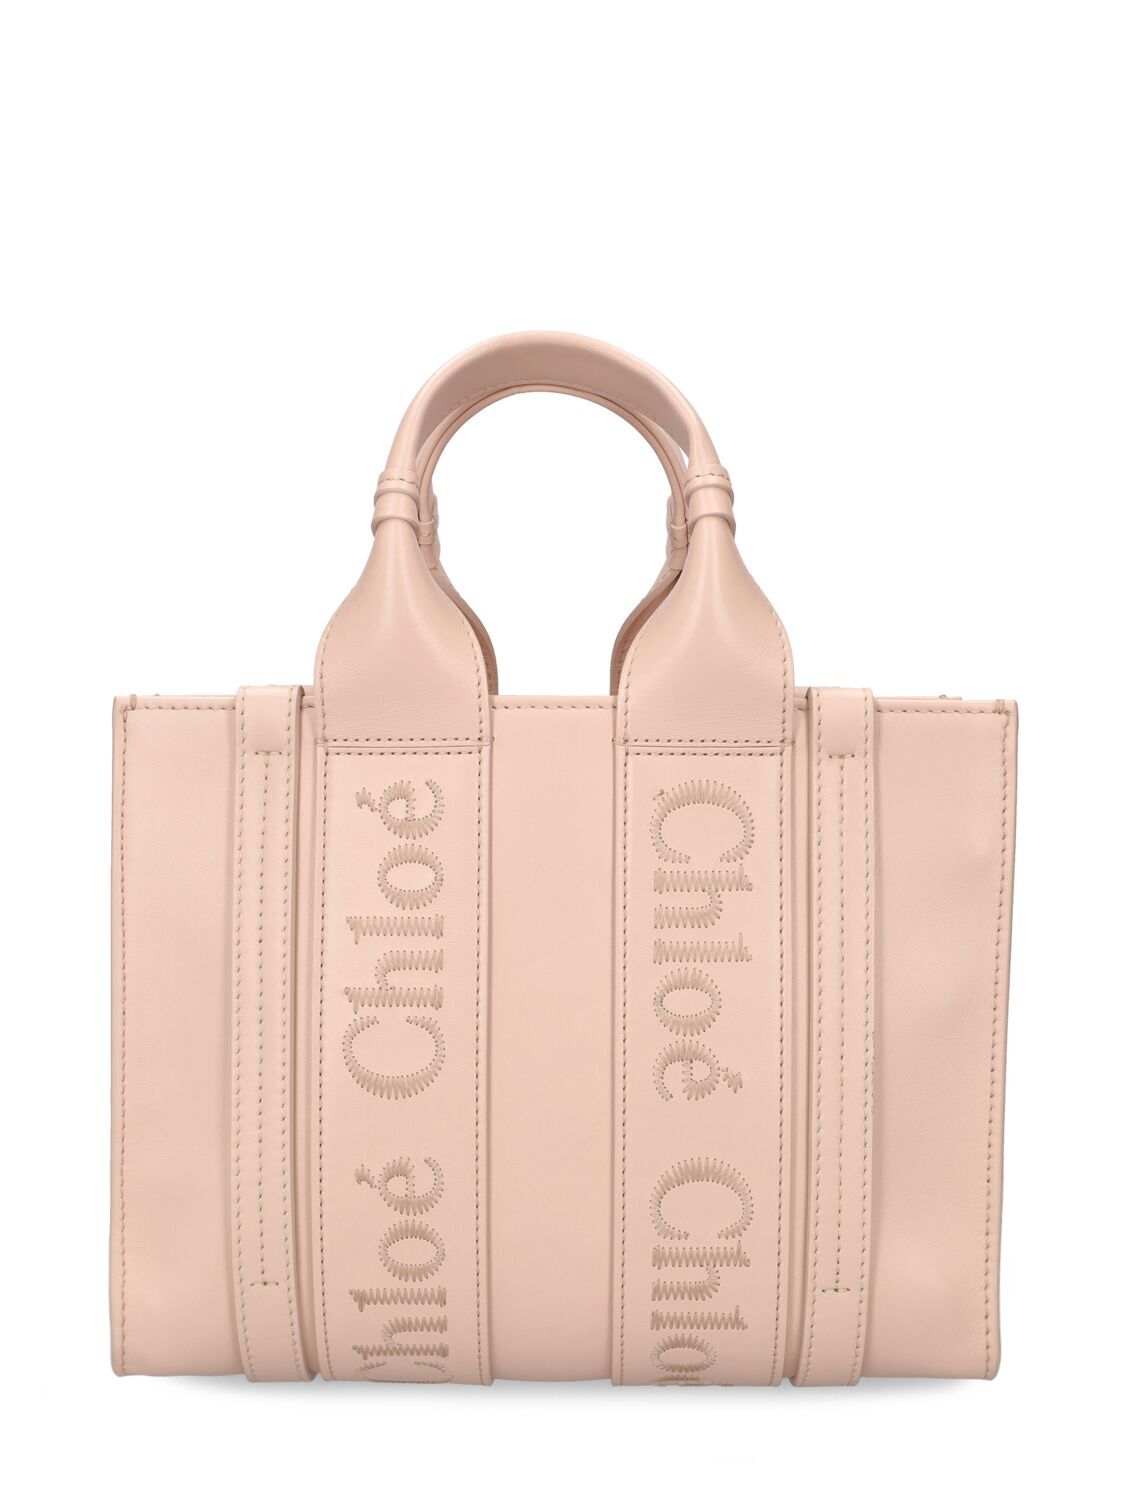 CHLOÉ Small Woody Leather Tote Bag in pink